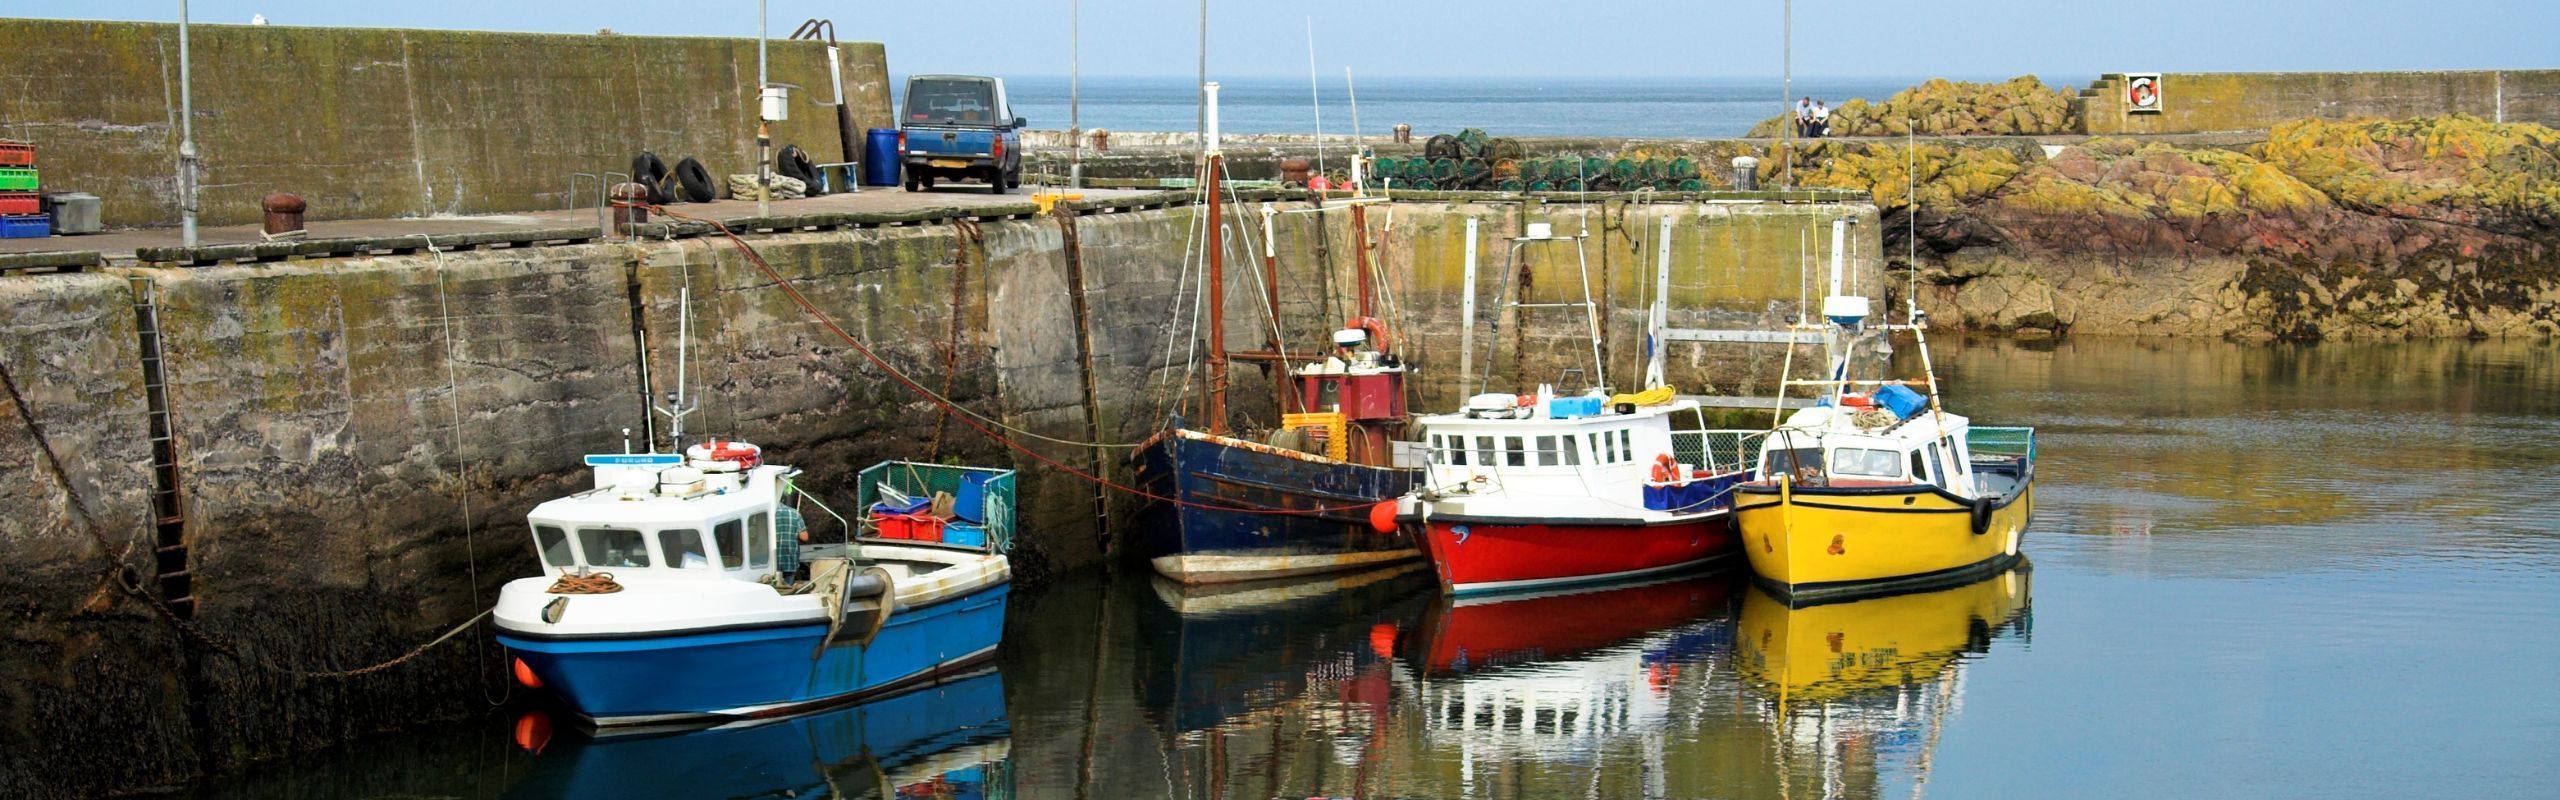 Image of fishing boats in Scotland